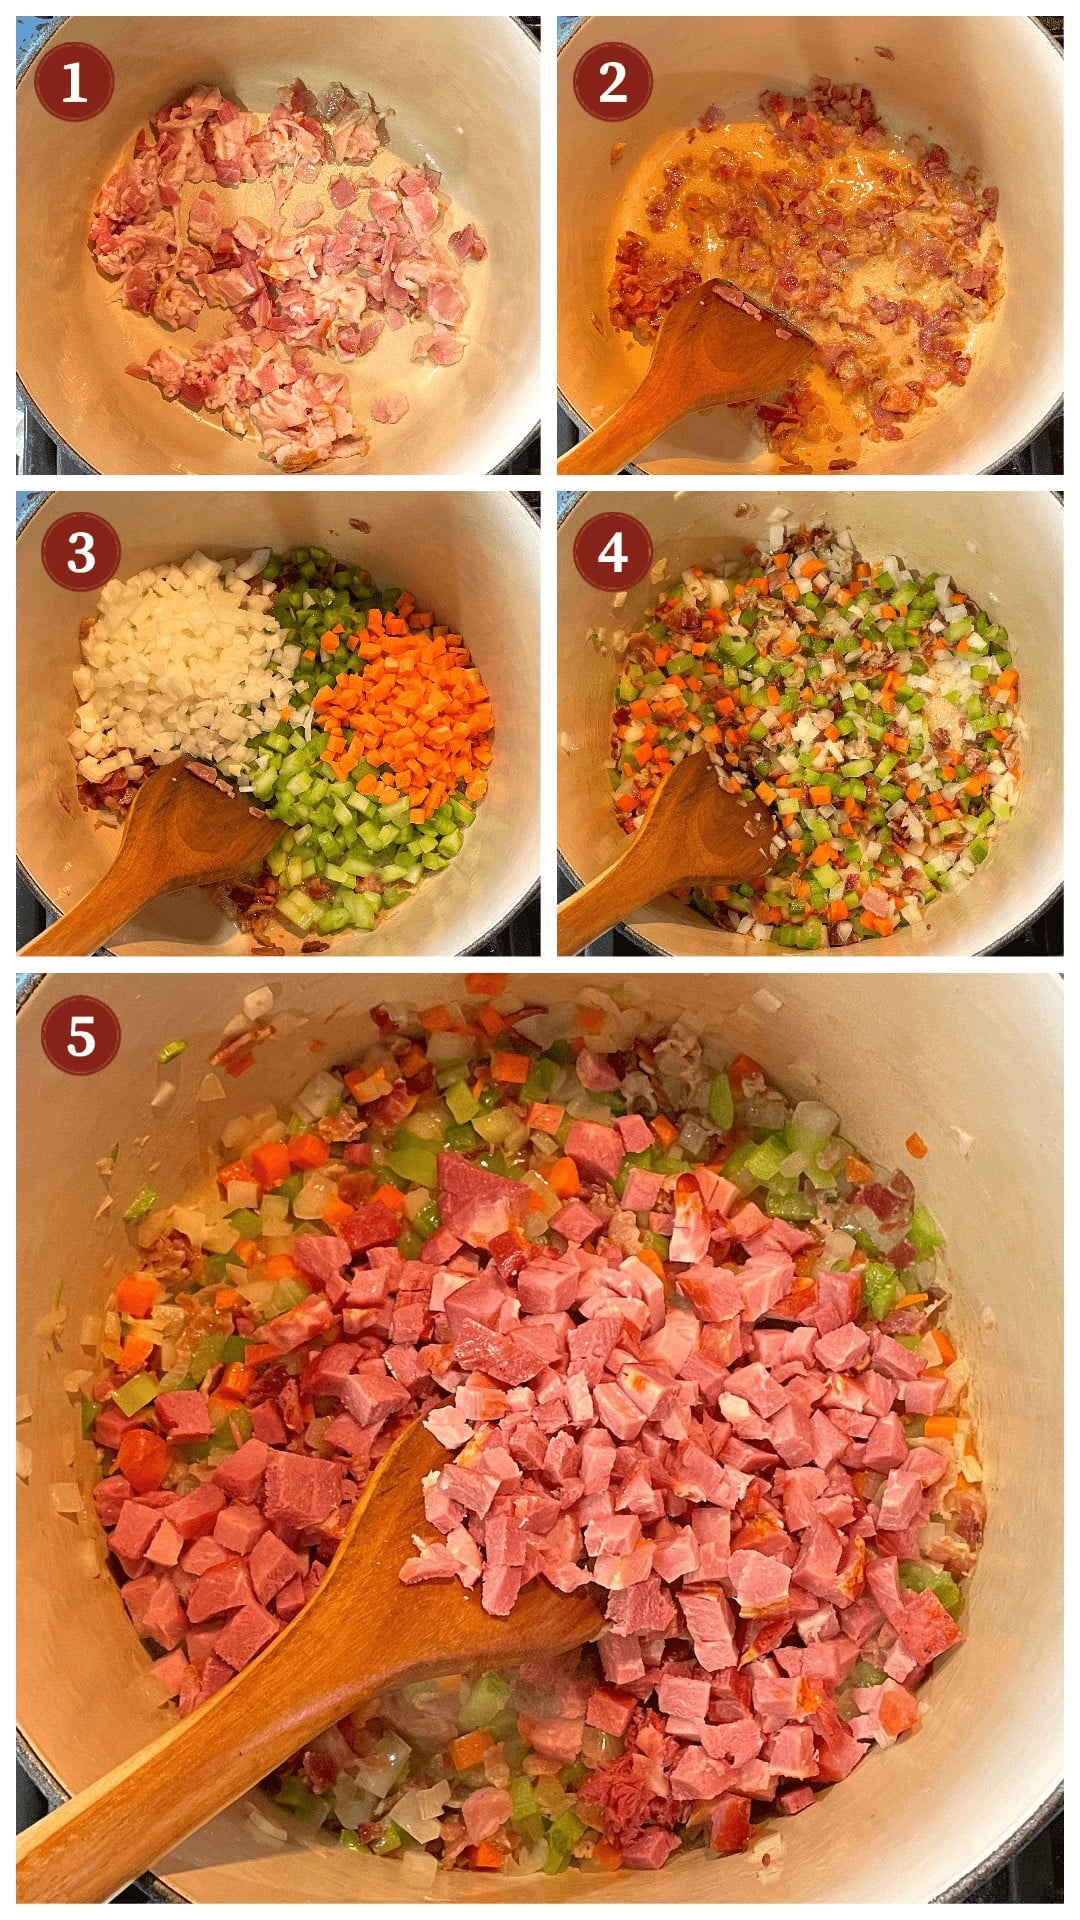 A collage of images showing how to prepare Southern butterbeans with tasso, steps 1-5.